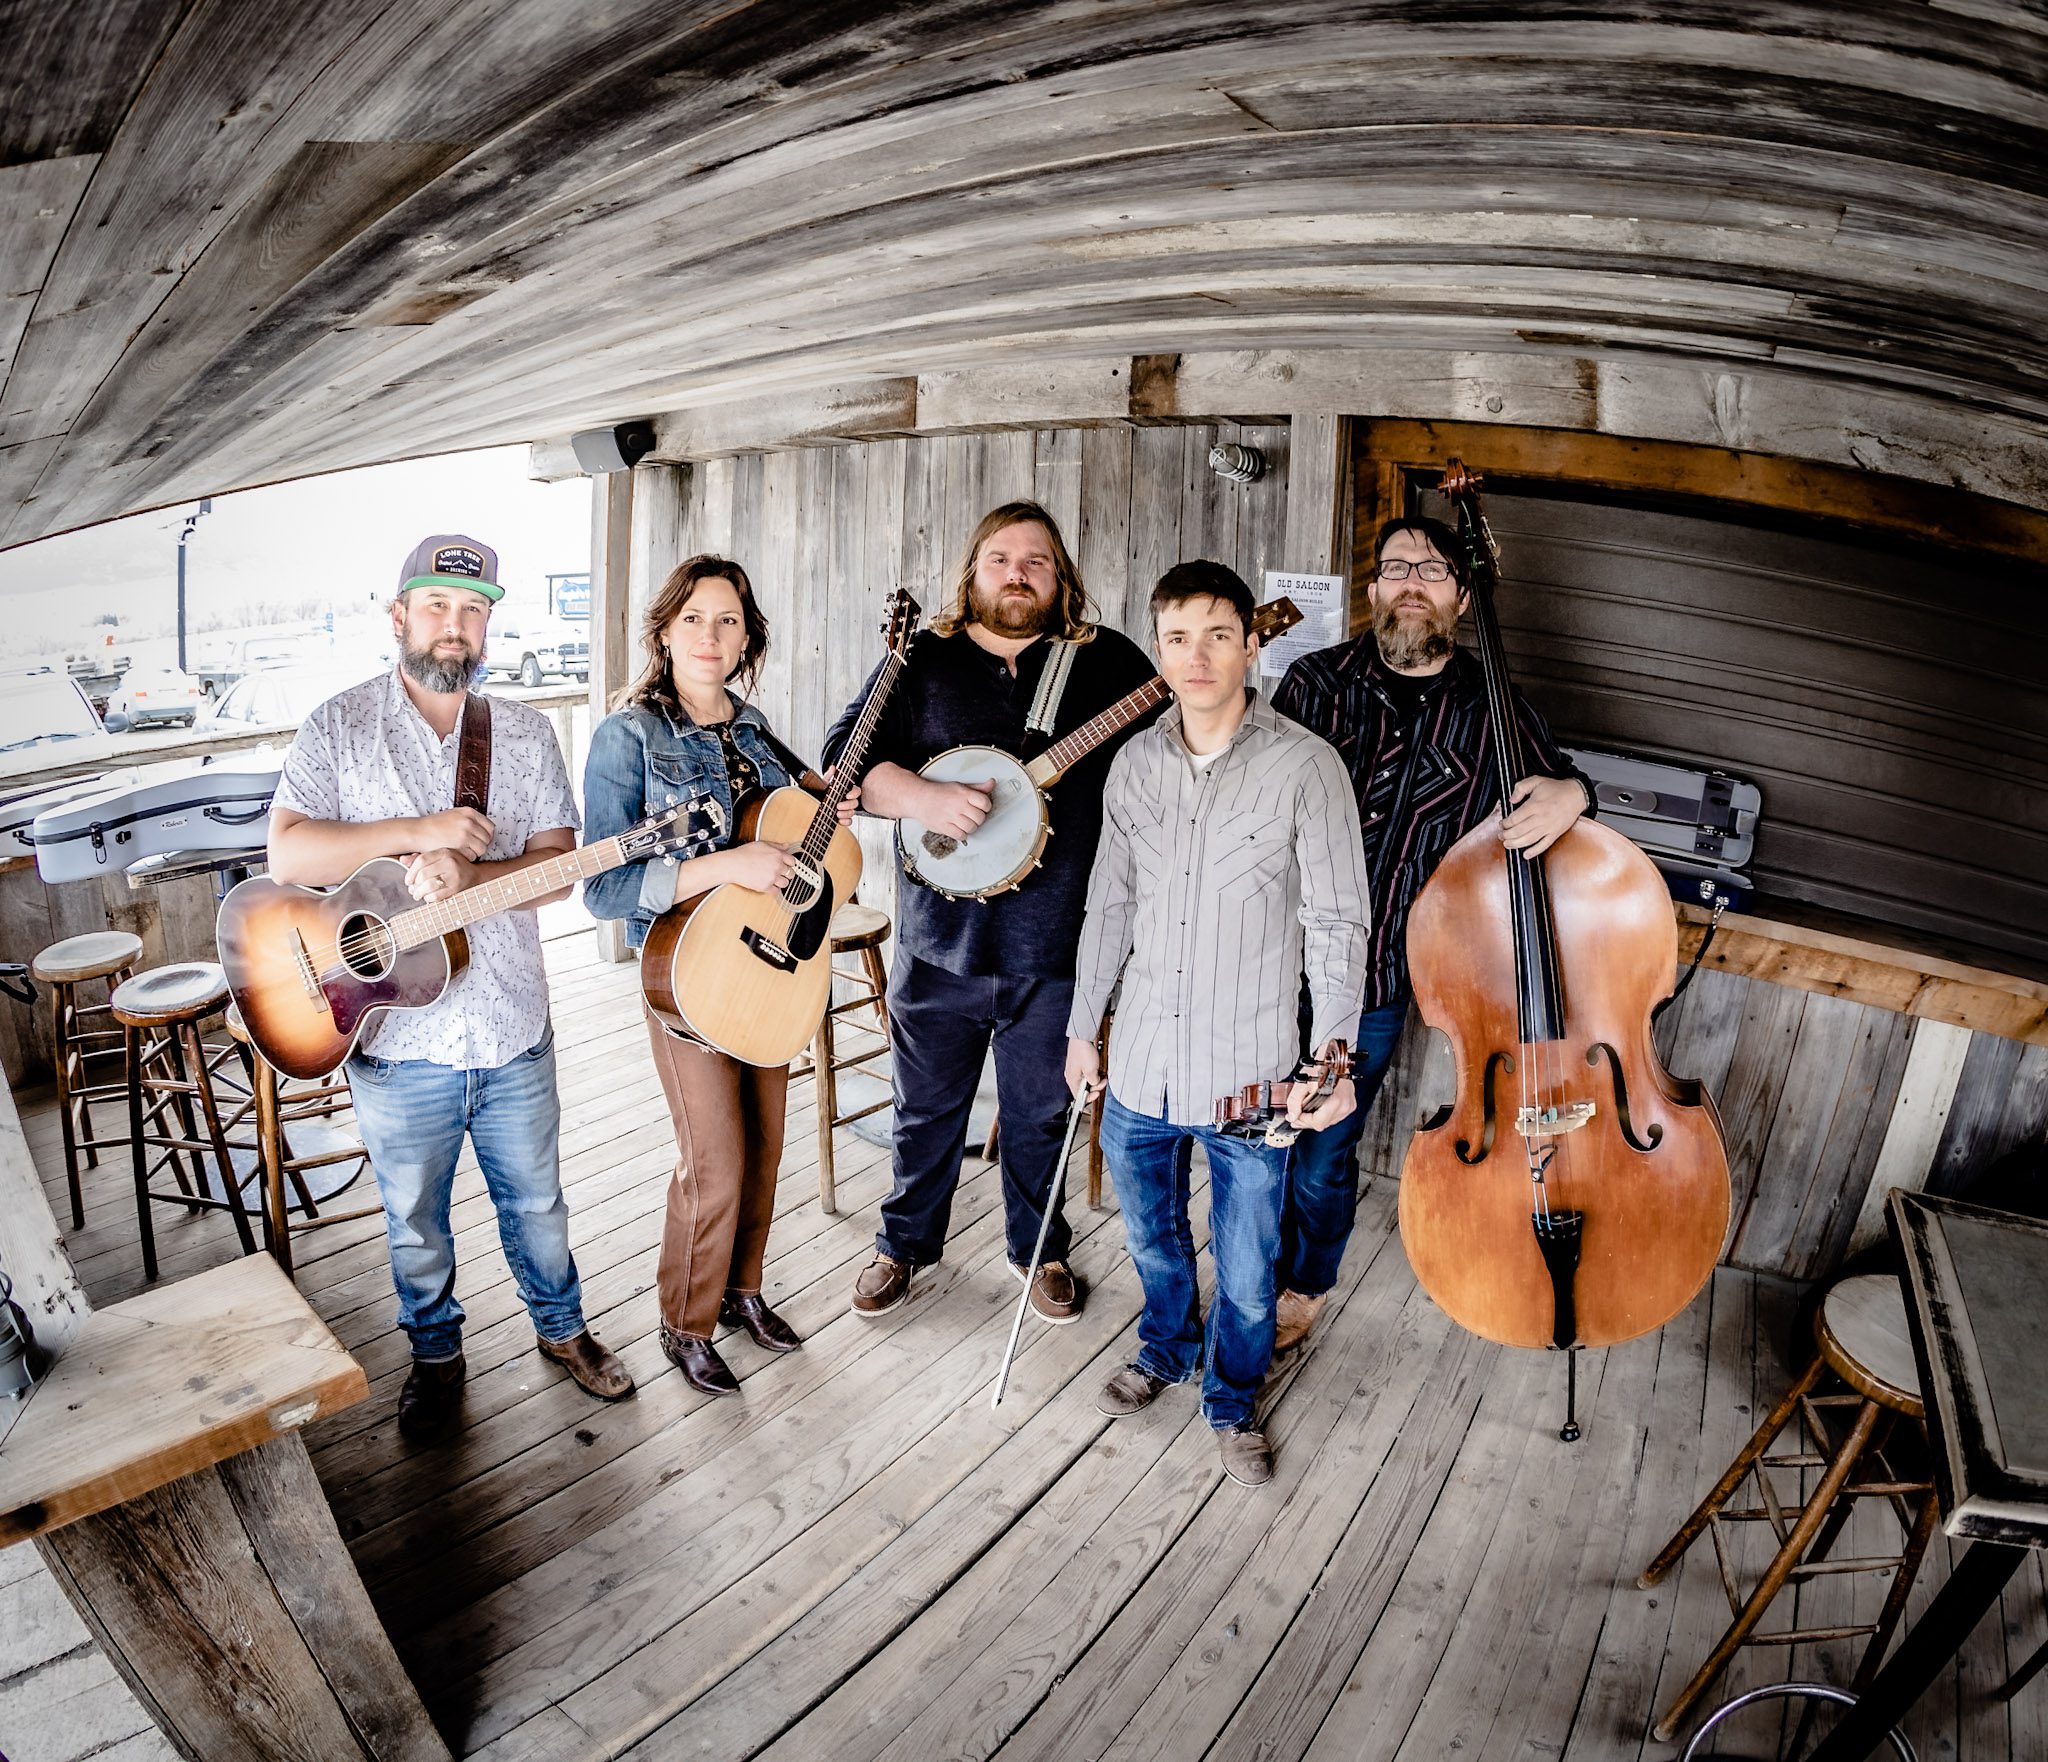 Group photo of Laney Lou and the Bird Dogs on a barn-like porch